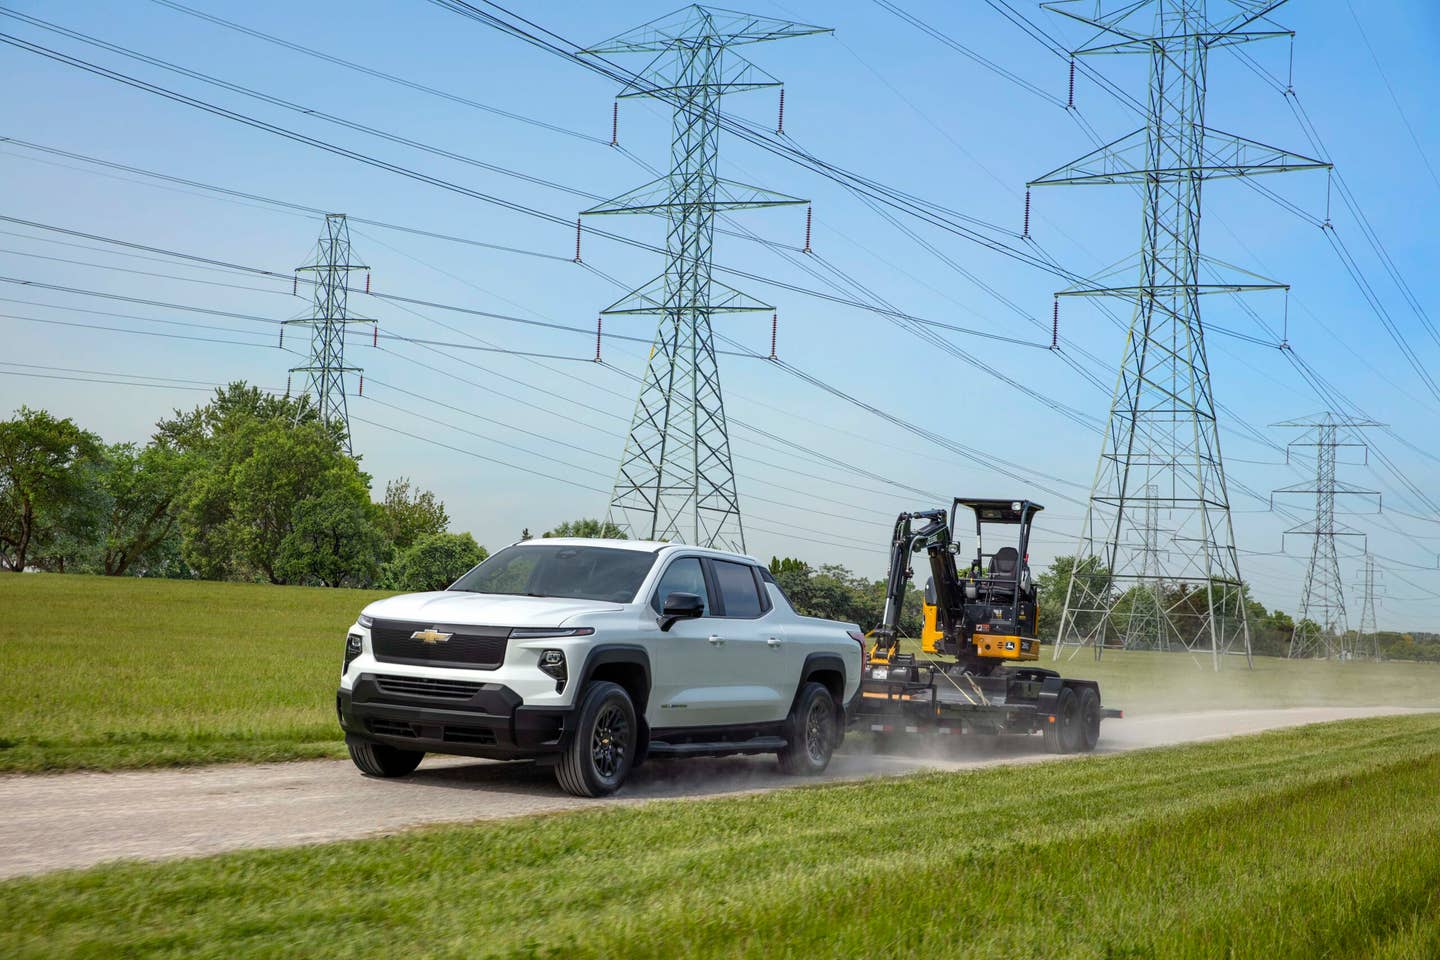 The Silverado EV WT kicking up dust while towing heavy machinery.